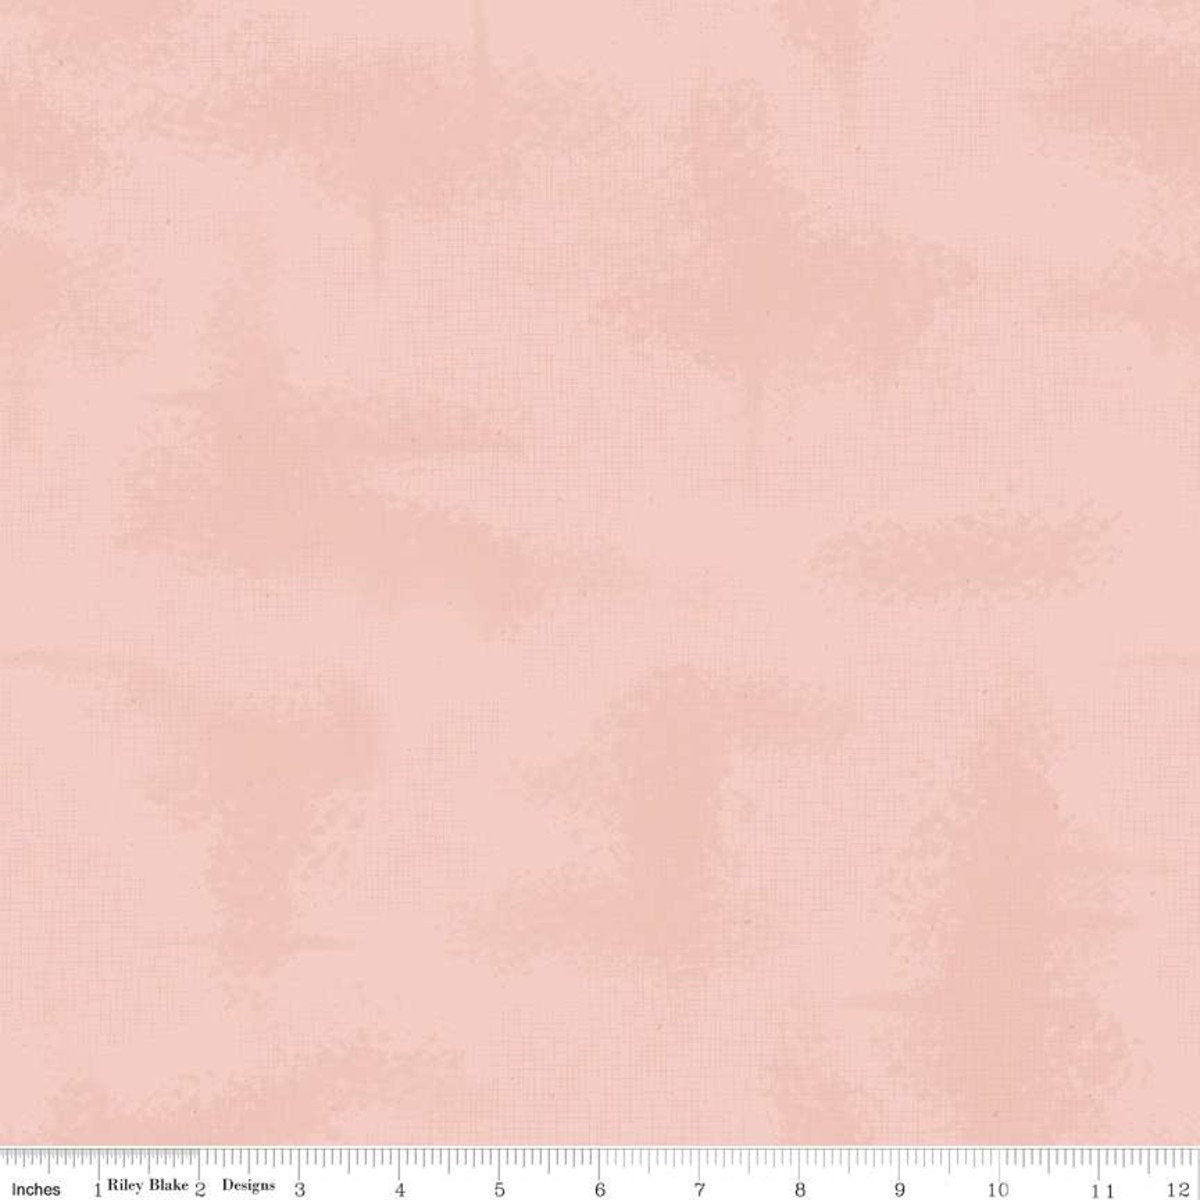 LAMINATED cotton fabric - Light Pink Shades (sold continuous by the half yard) Basic, Food Safe Fabric, BPA free